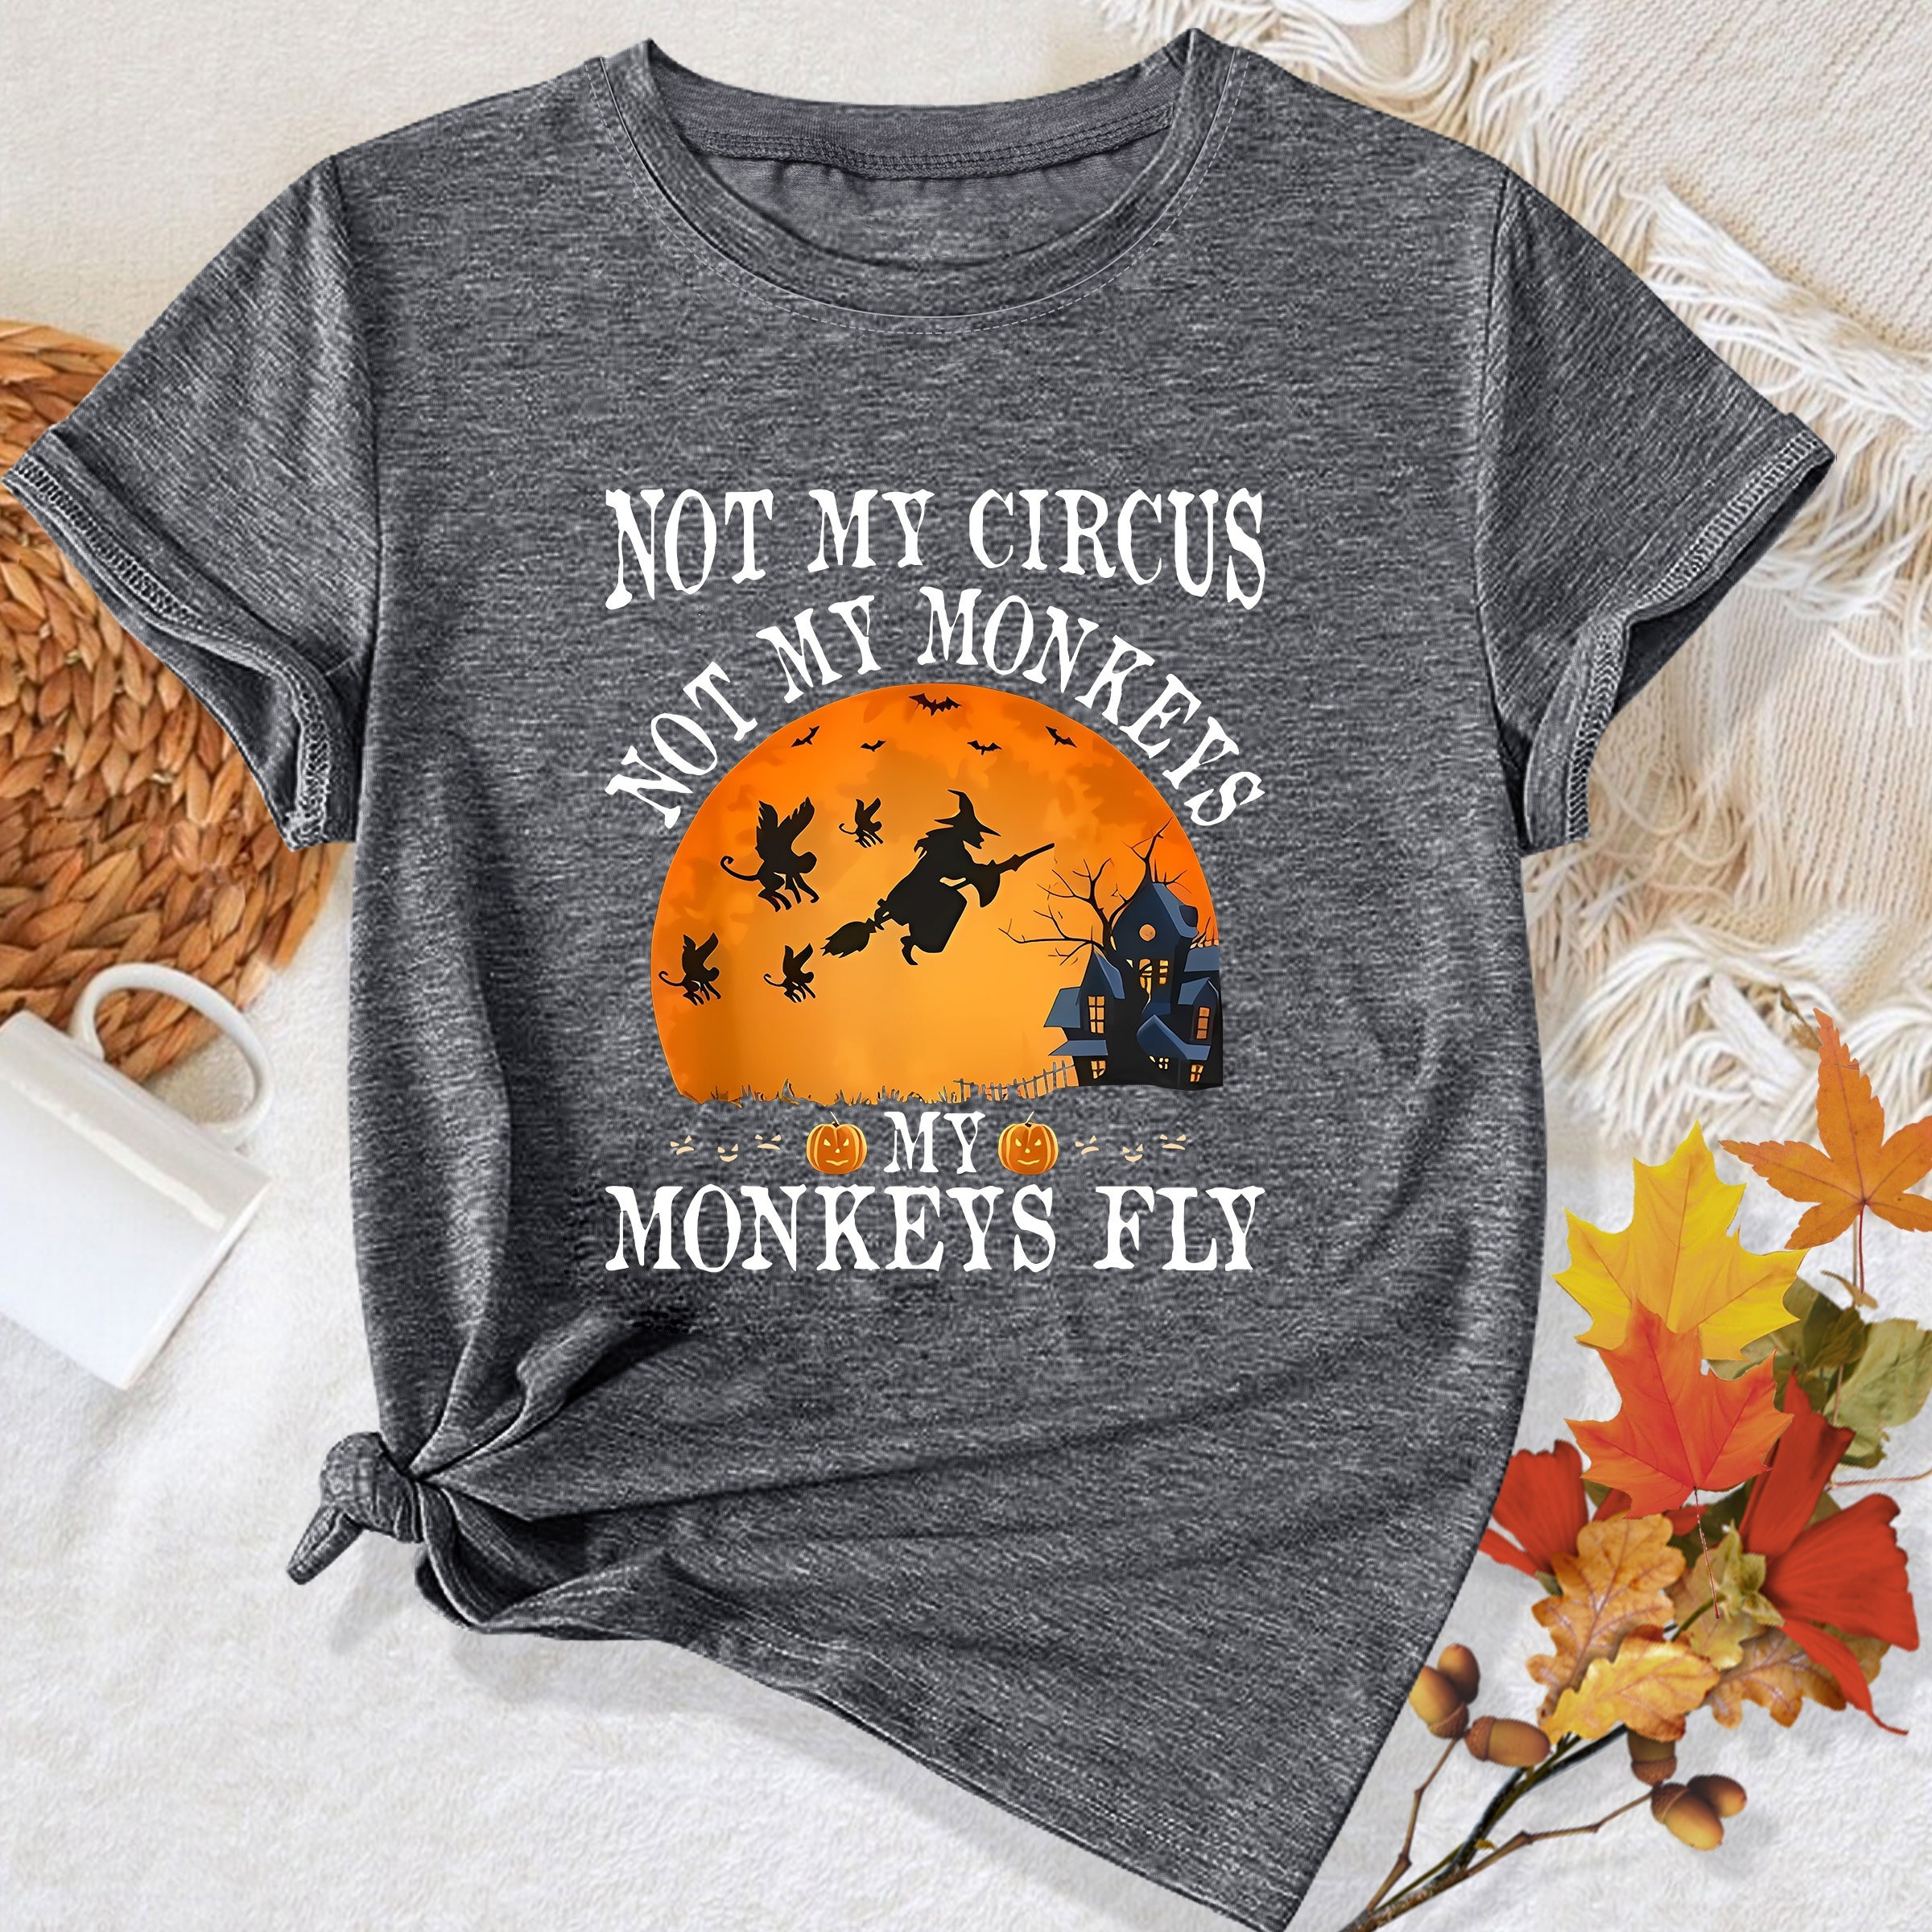 

Women's Halloween Graphic Tee, "not My Circus Not My Monkeys My Monkeys Fly" Print, Round Neck, Short Sleeve, Casual Vintage Style, Fashion Trendy Top, Adult Sportswear T-shirt